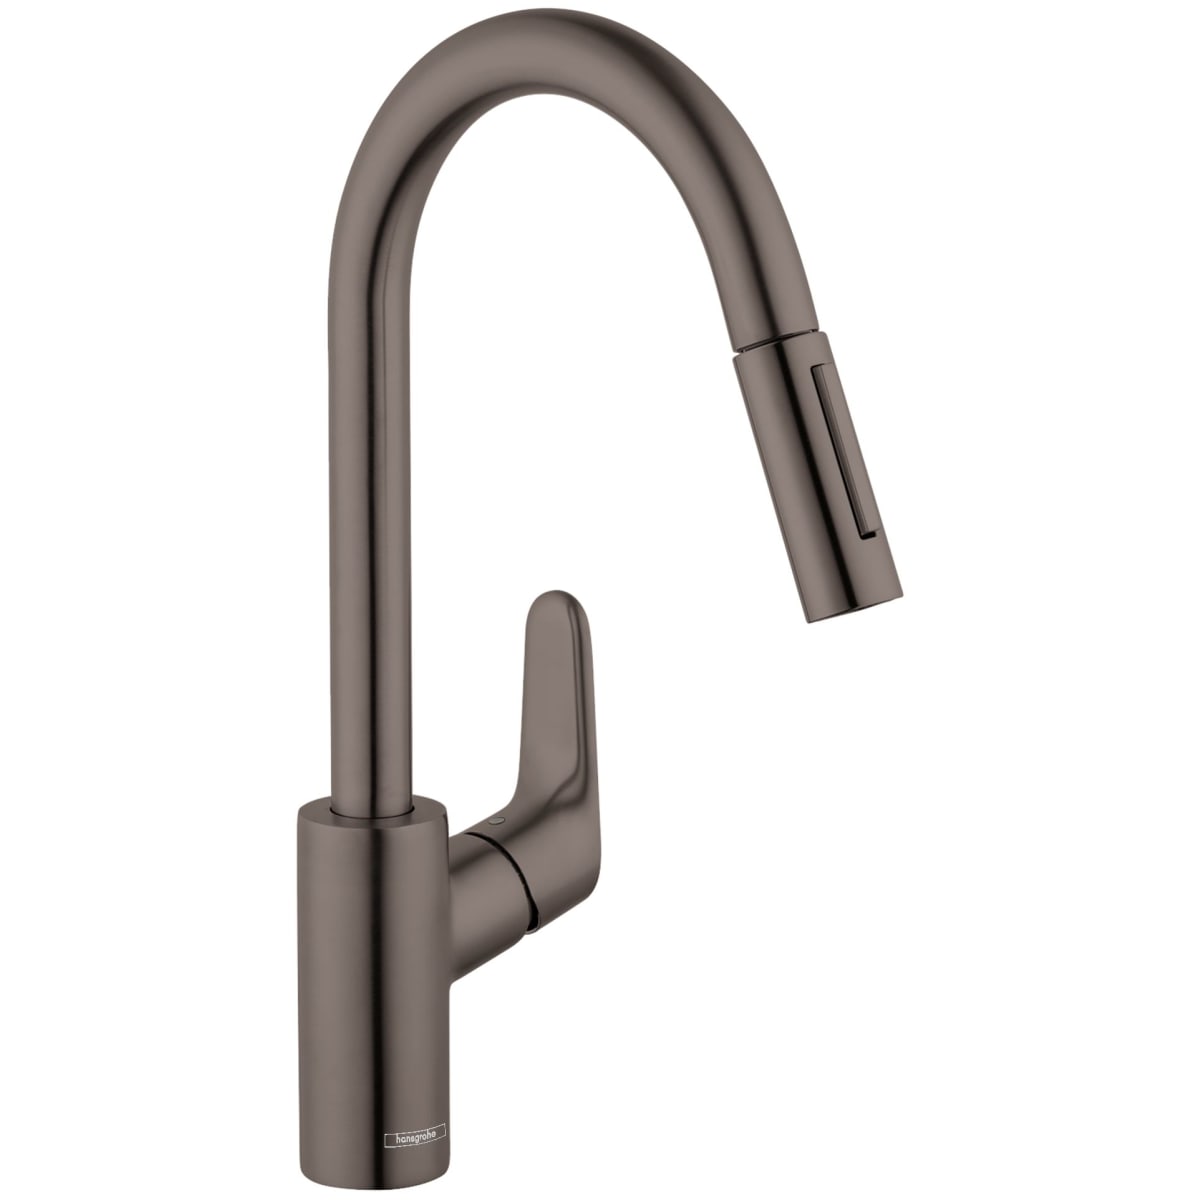 Focus 1 75 Gpm Pull Down Kitchen Faucet